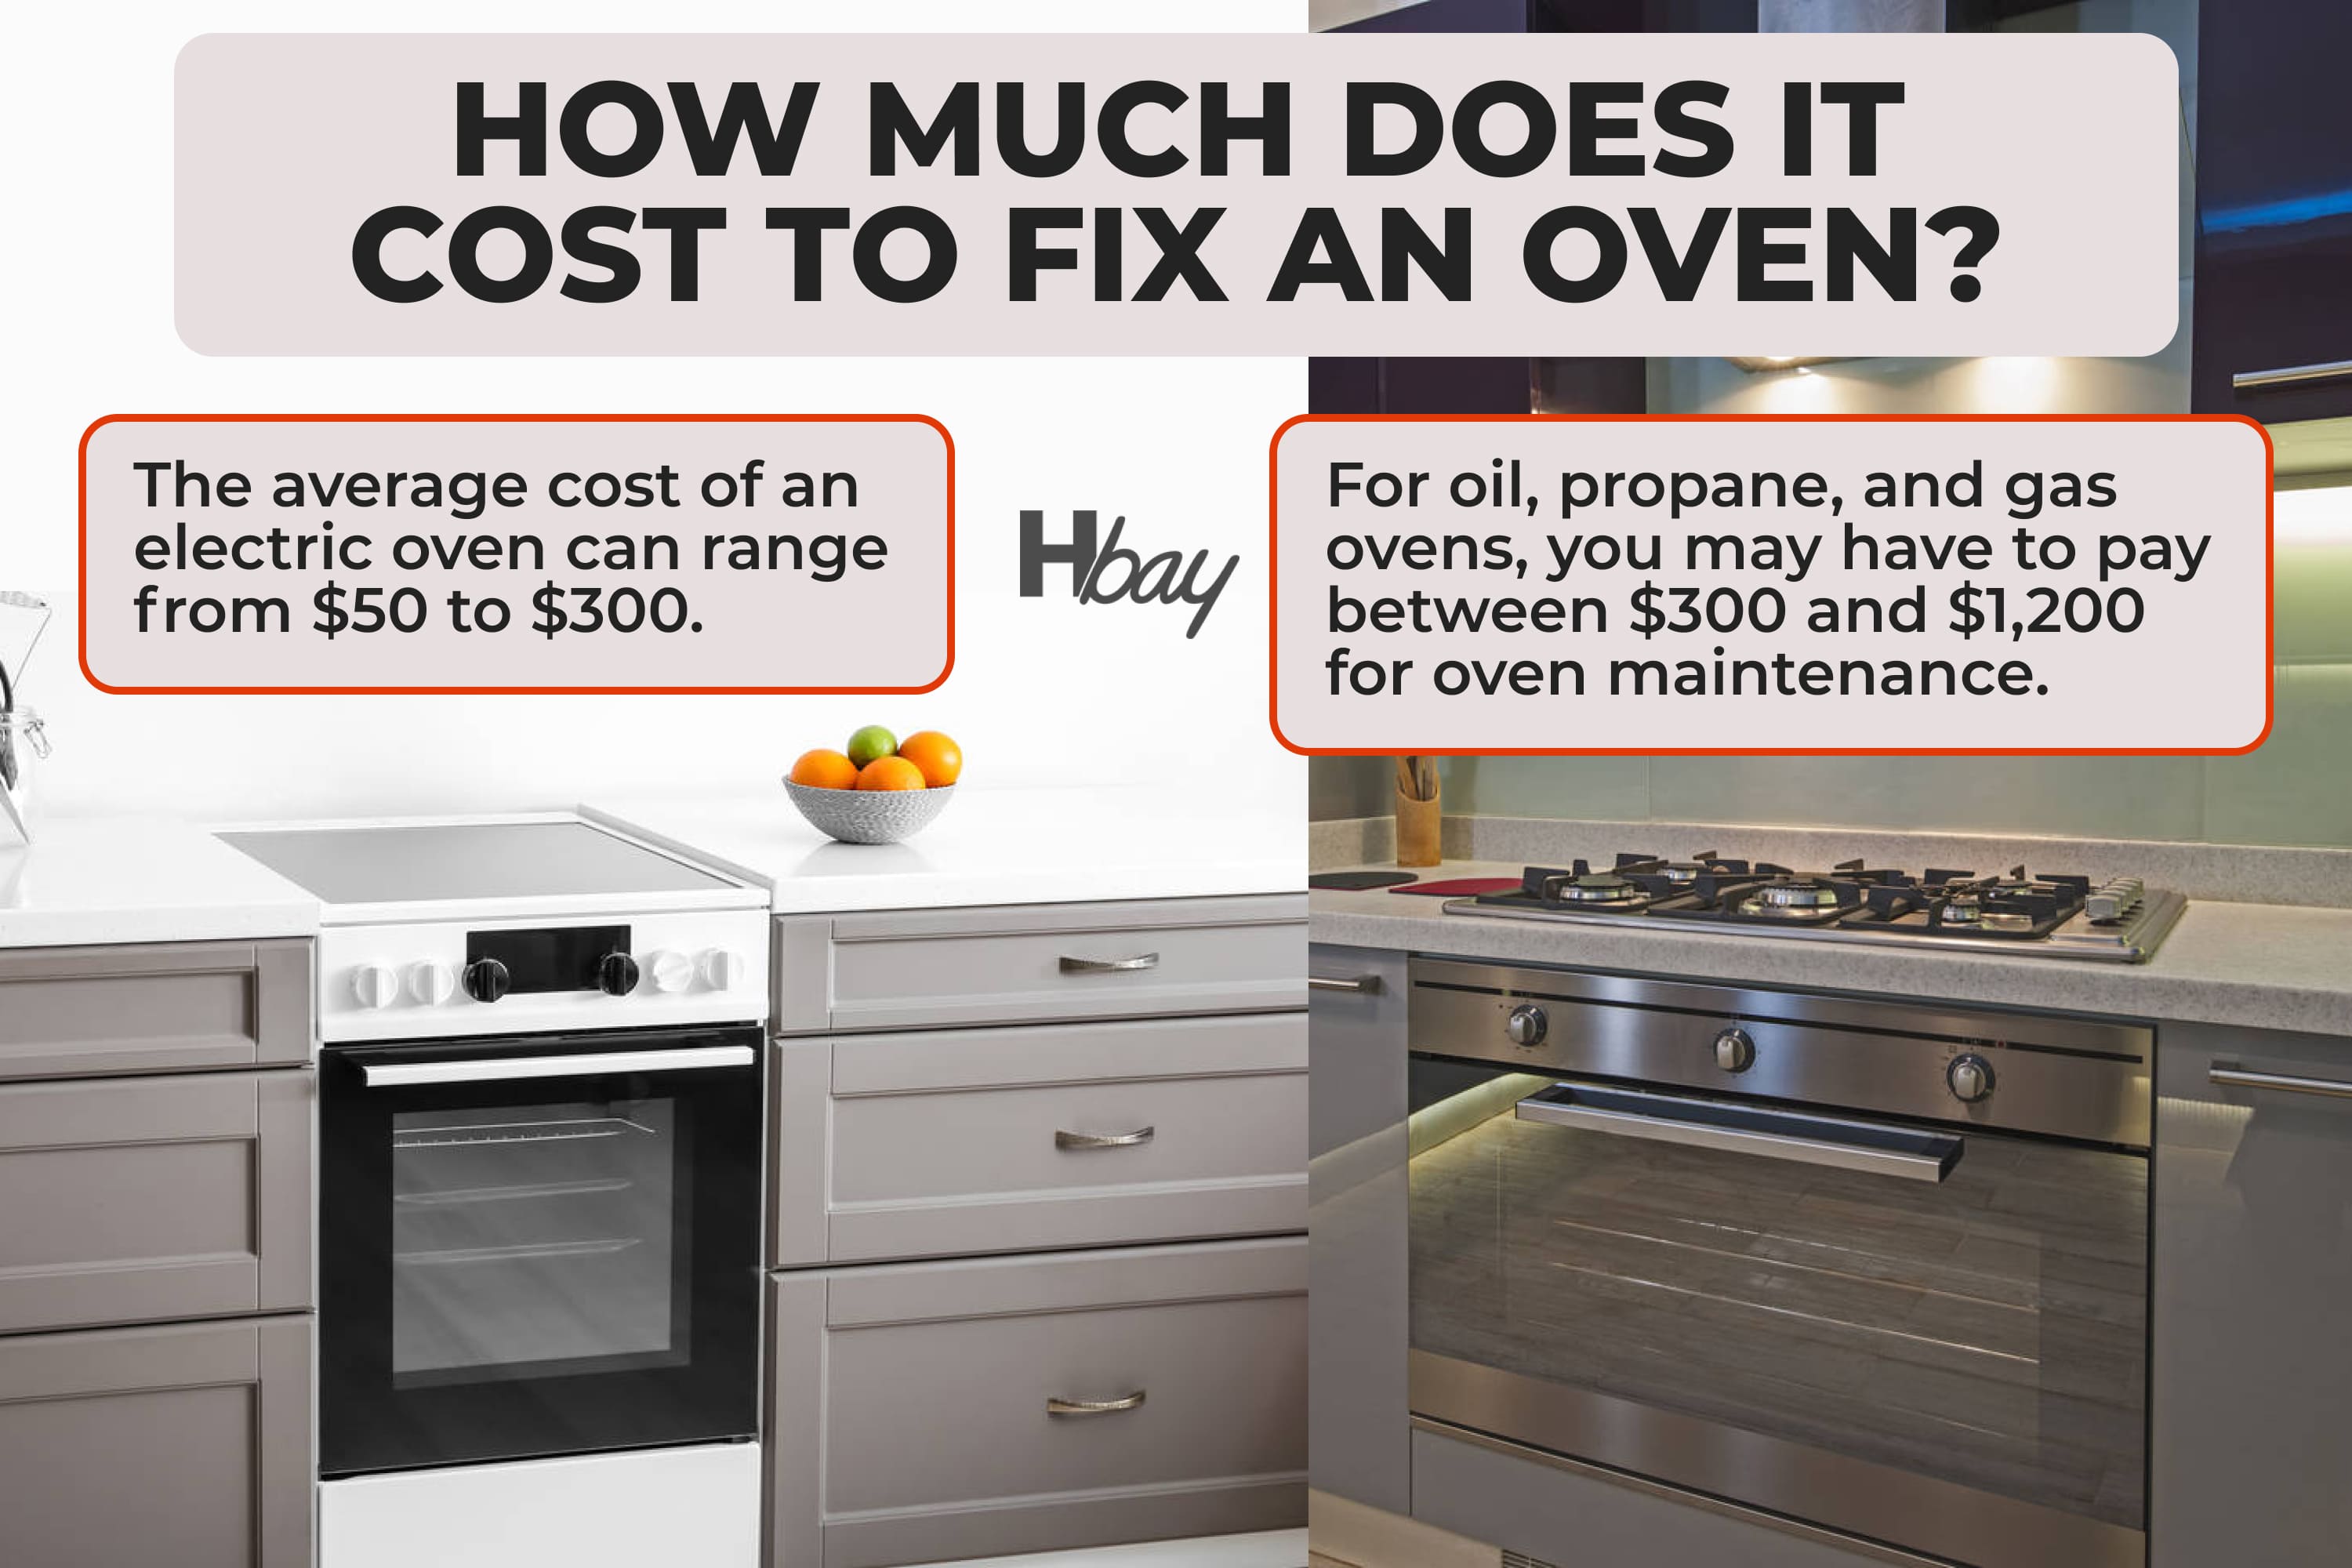 How much does it cost to fix an oven